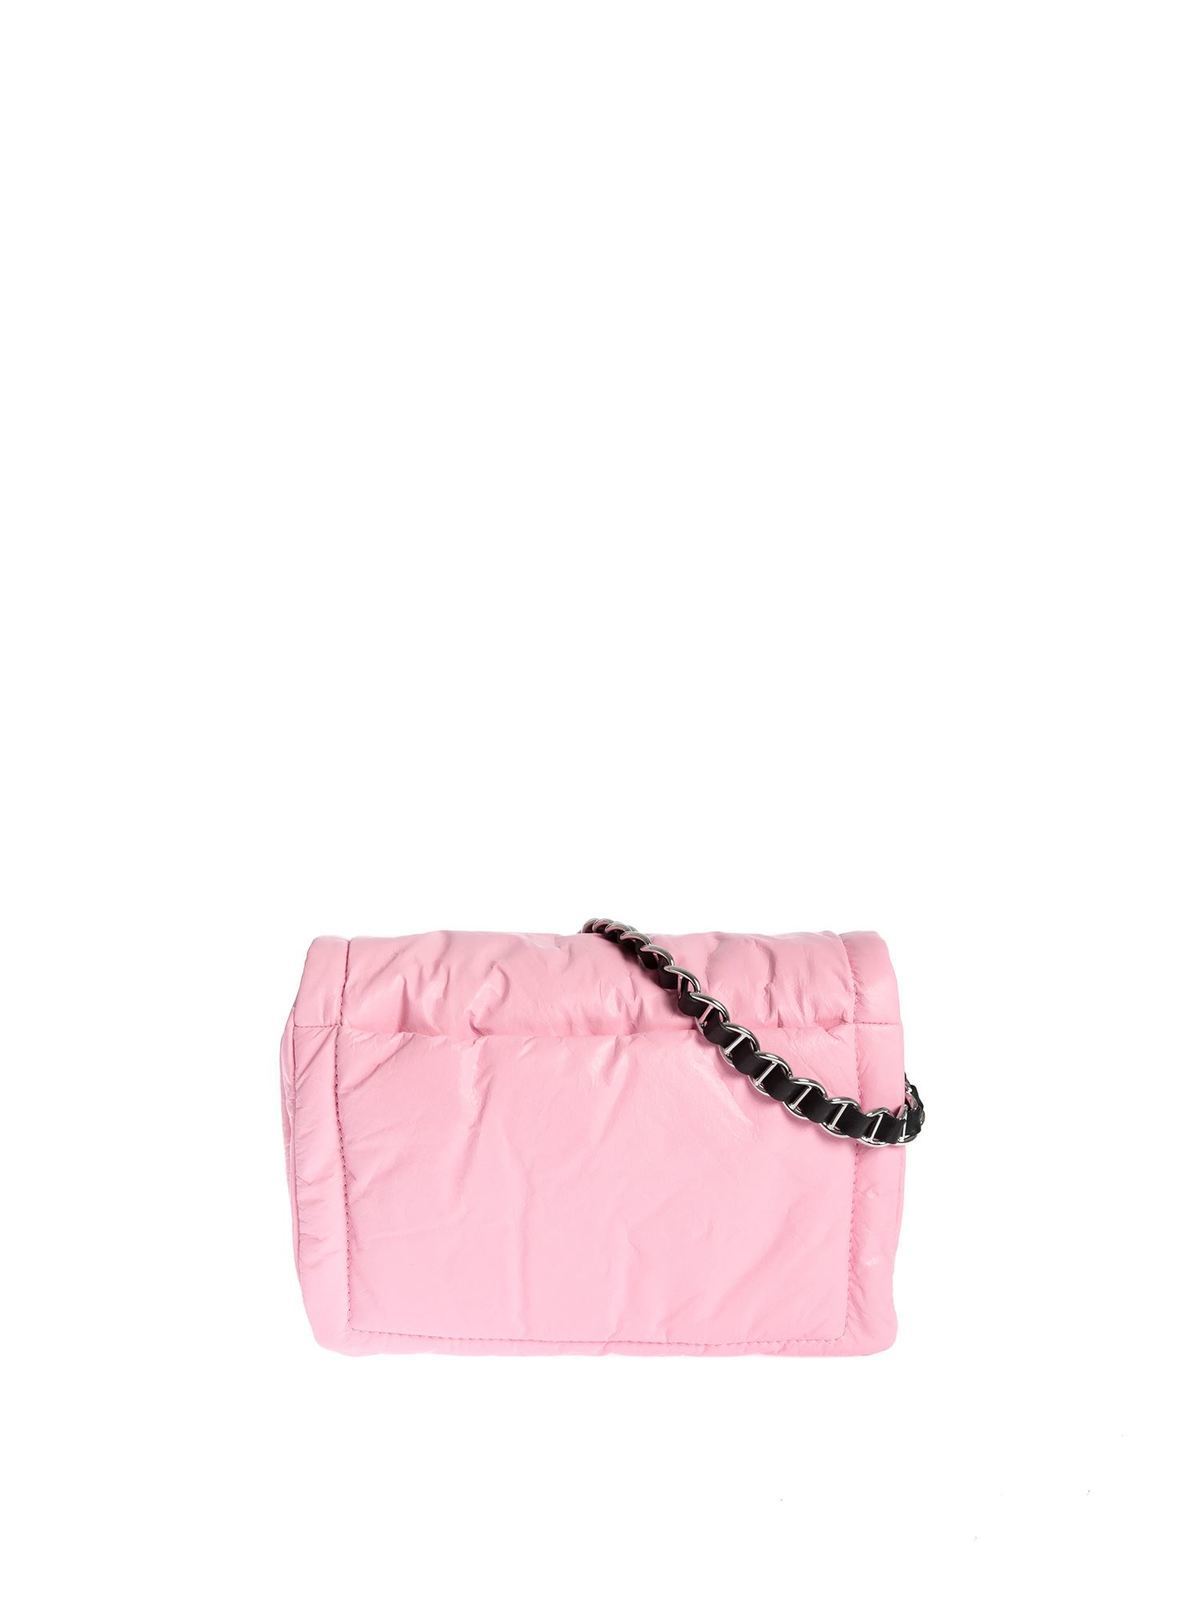 Marc Jacobs The Pillow Bag in Pink